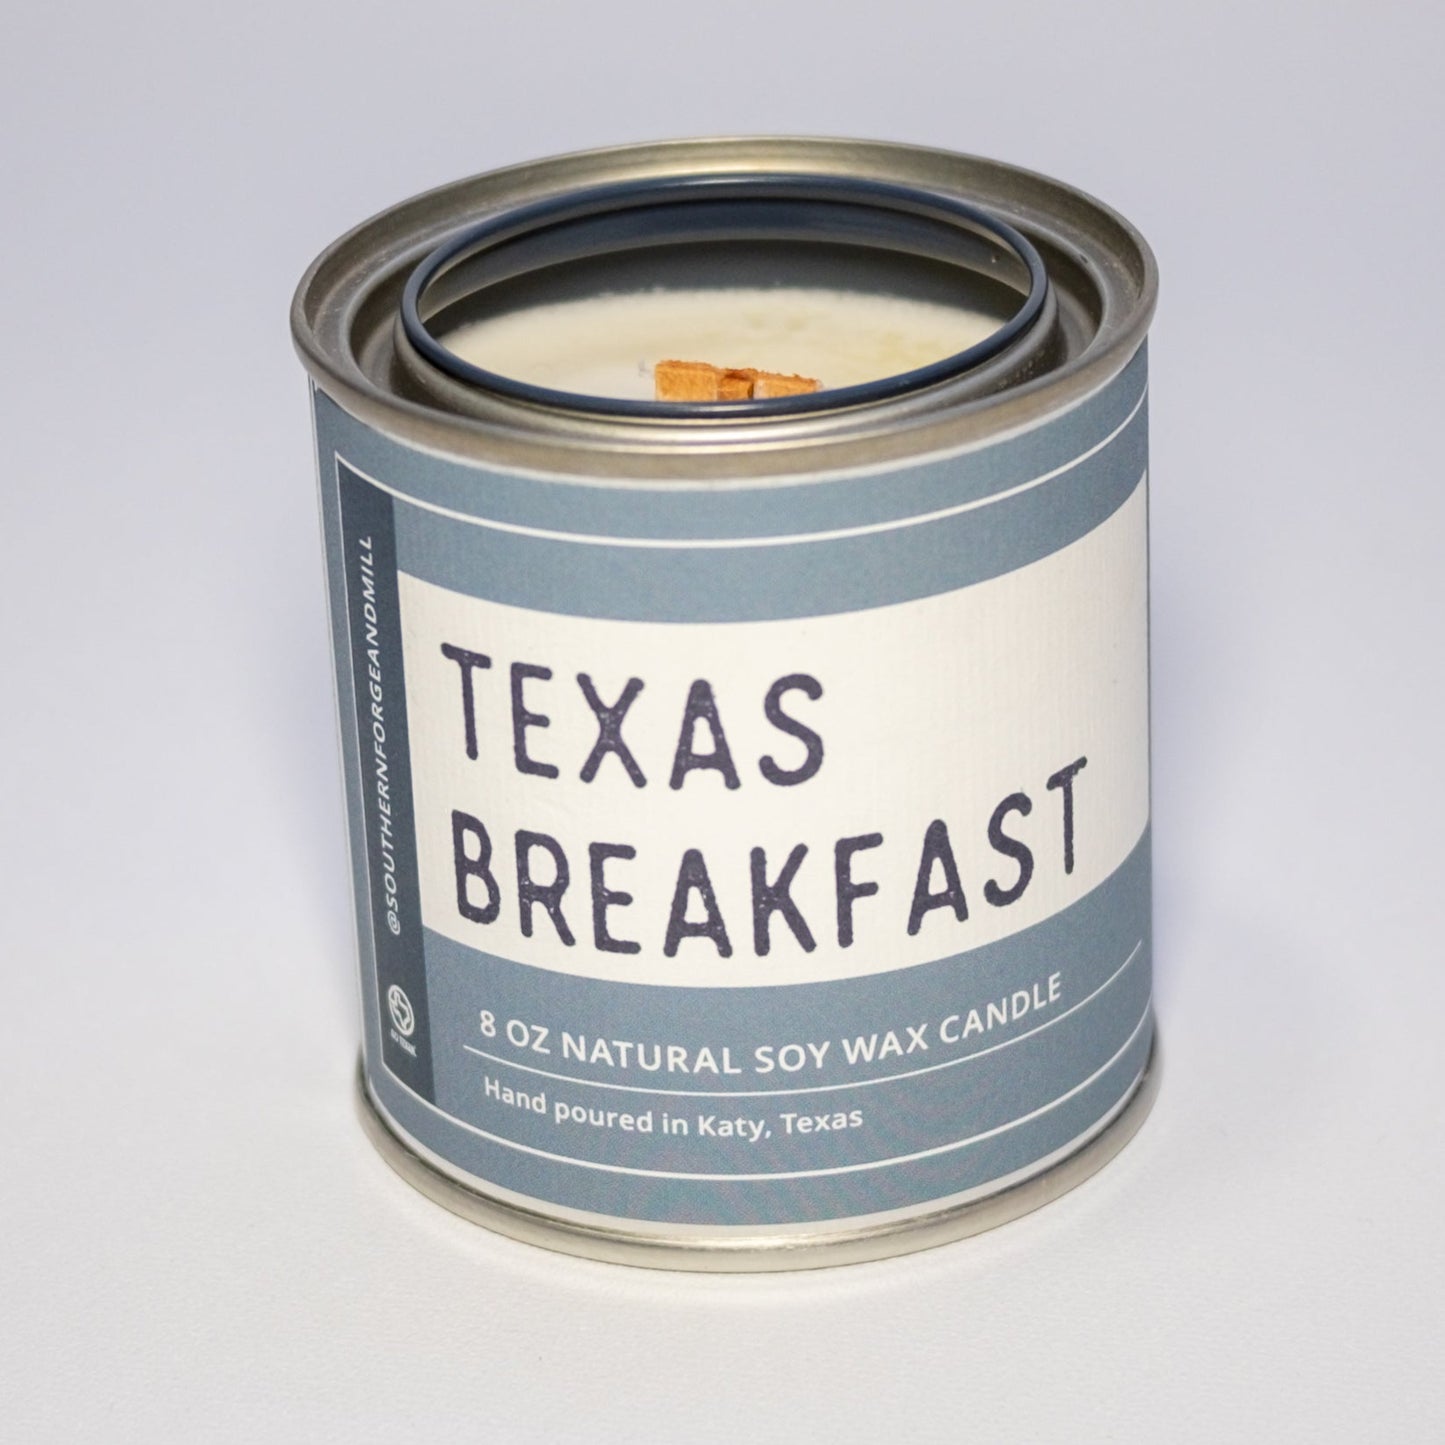 Texas Breakfast Soy Candle